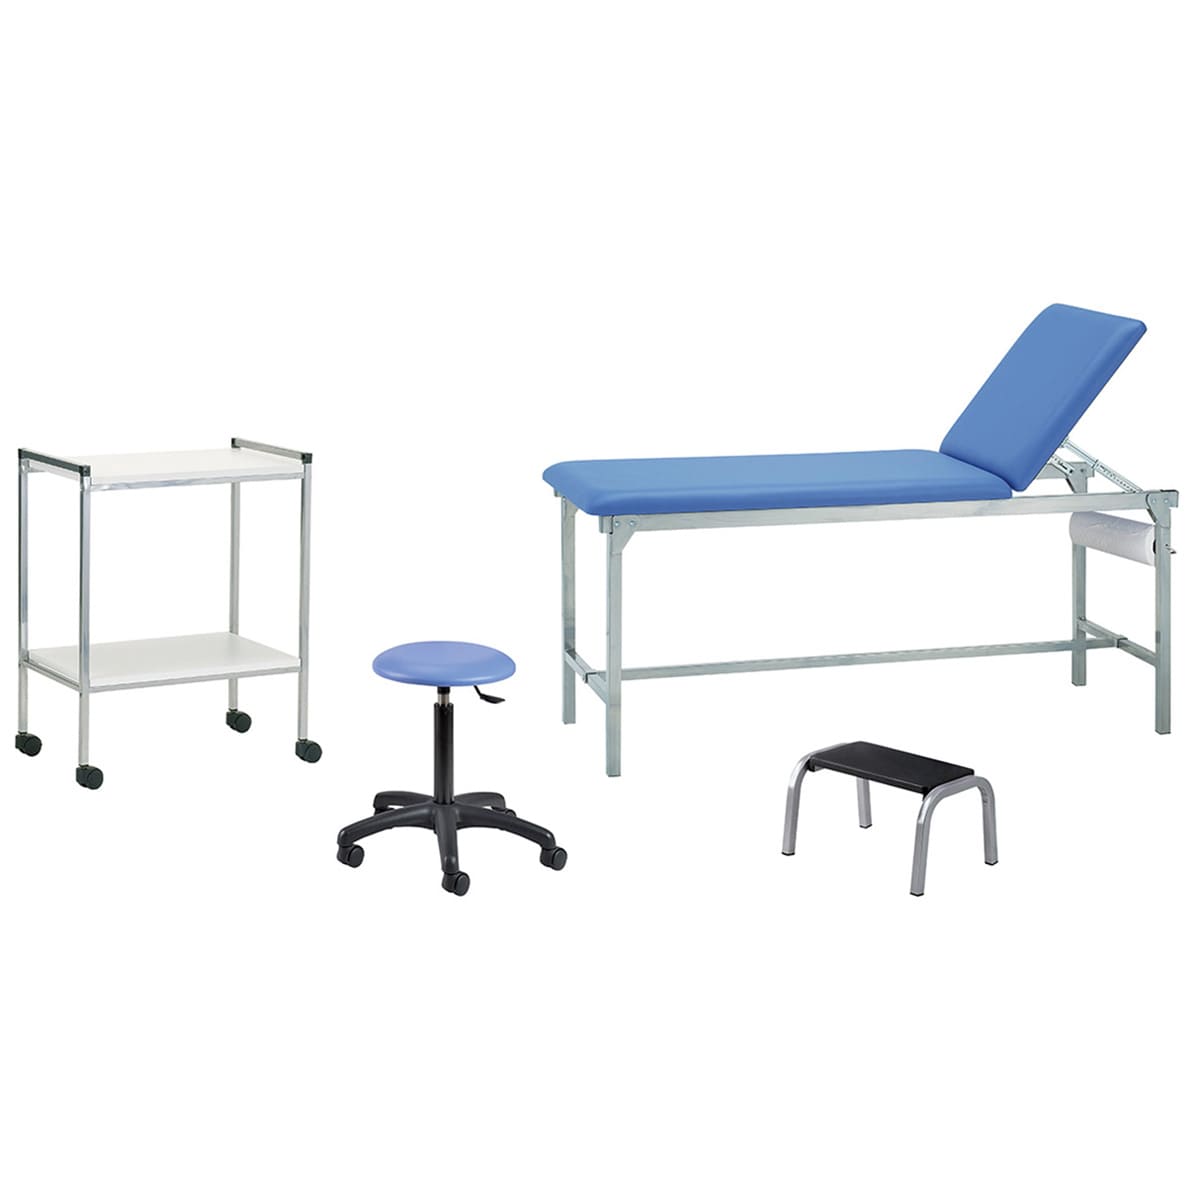 Office pack: Exam couch, Stool, Trolley and Steptool